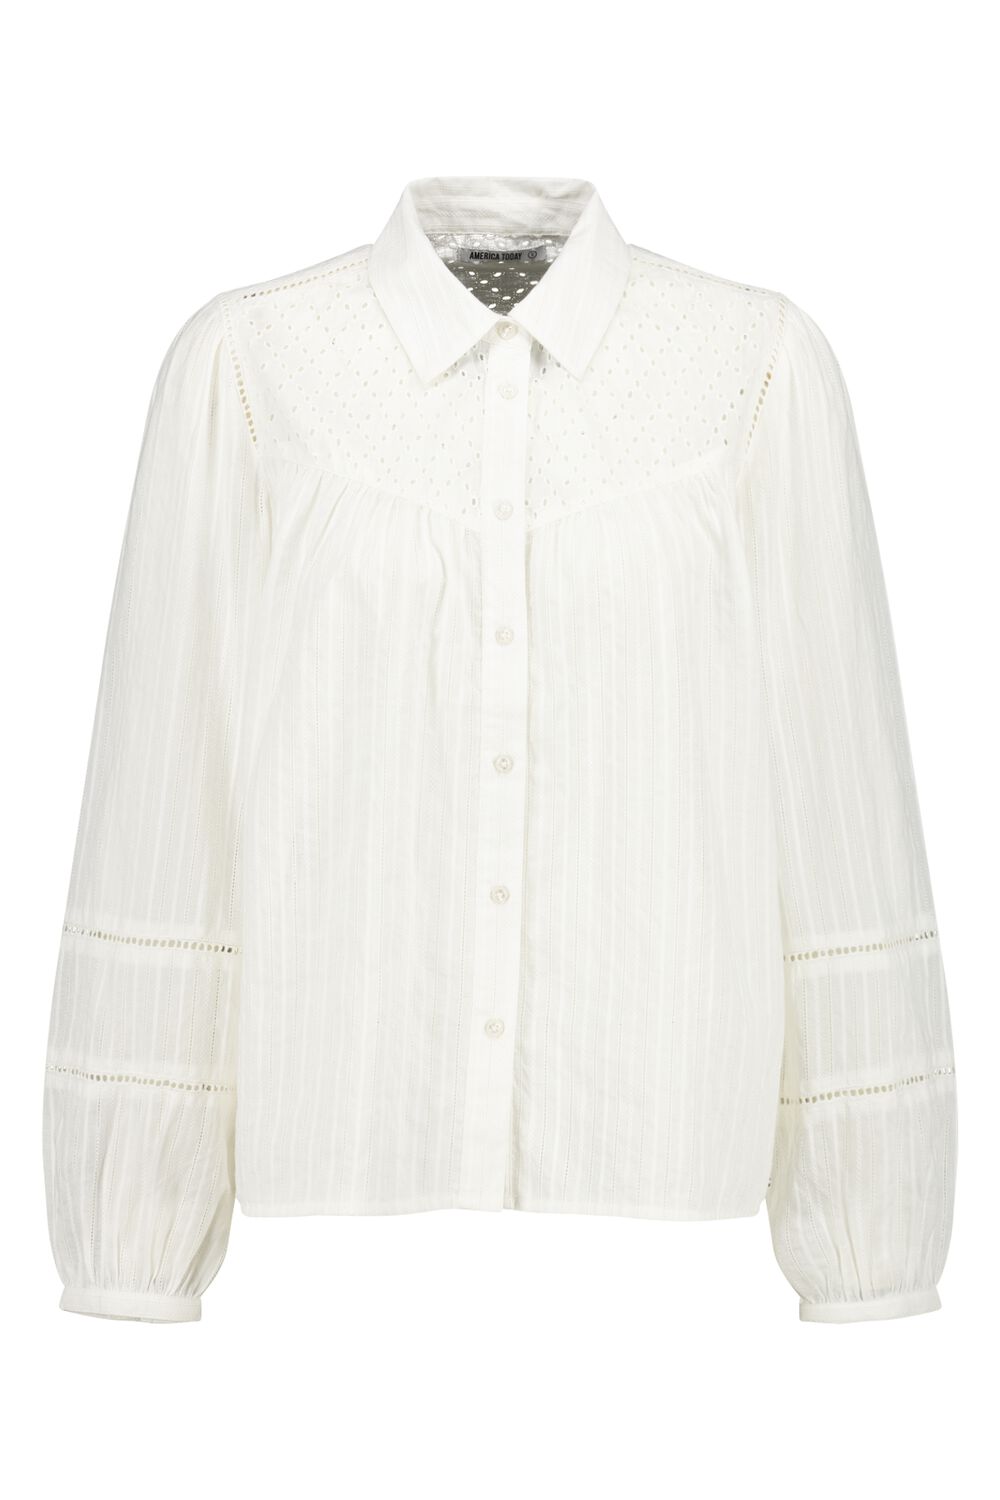 America Today Dames Blouse Blanca Wit